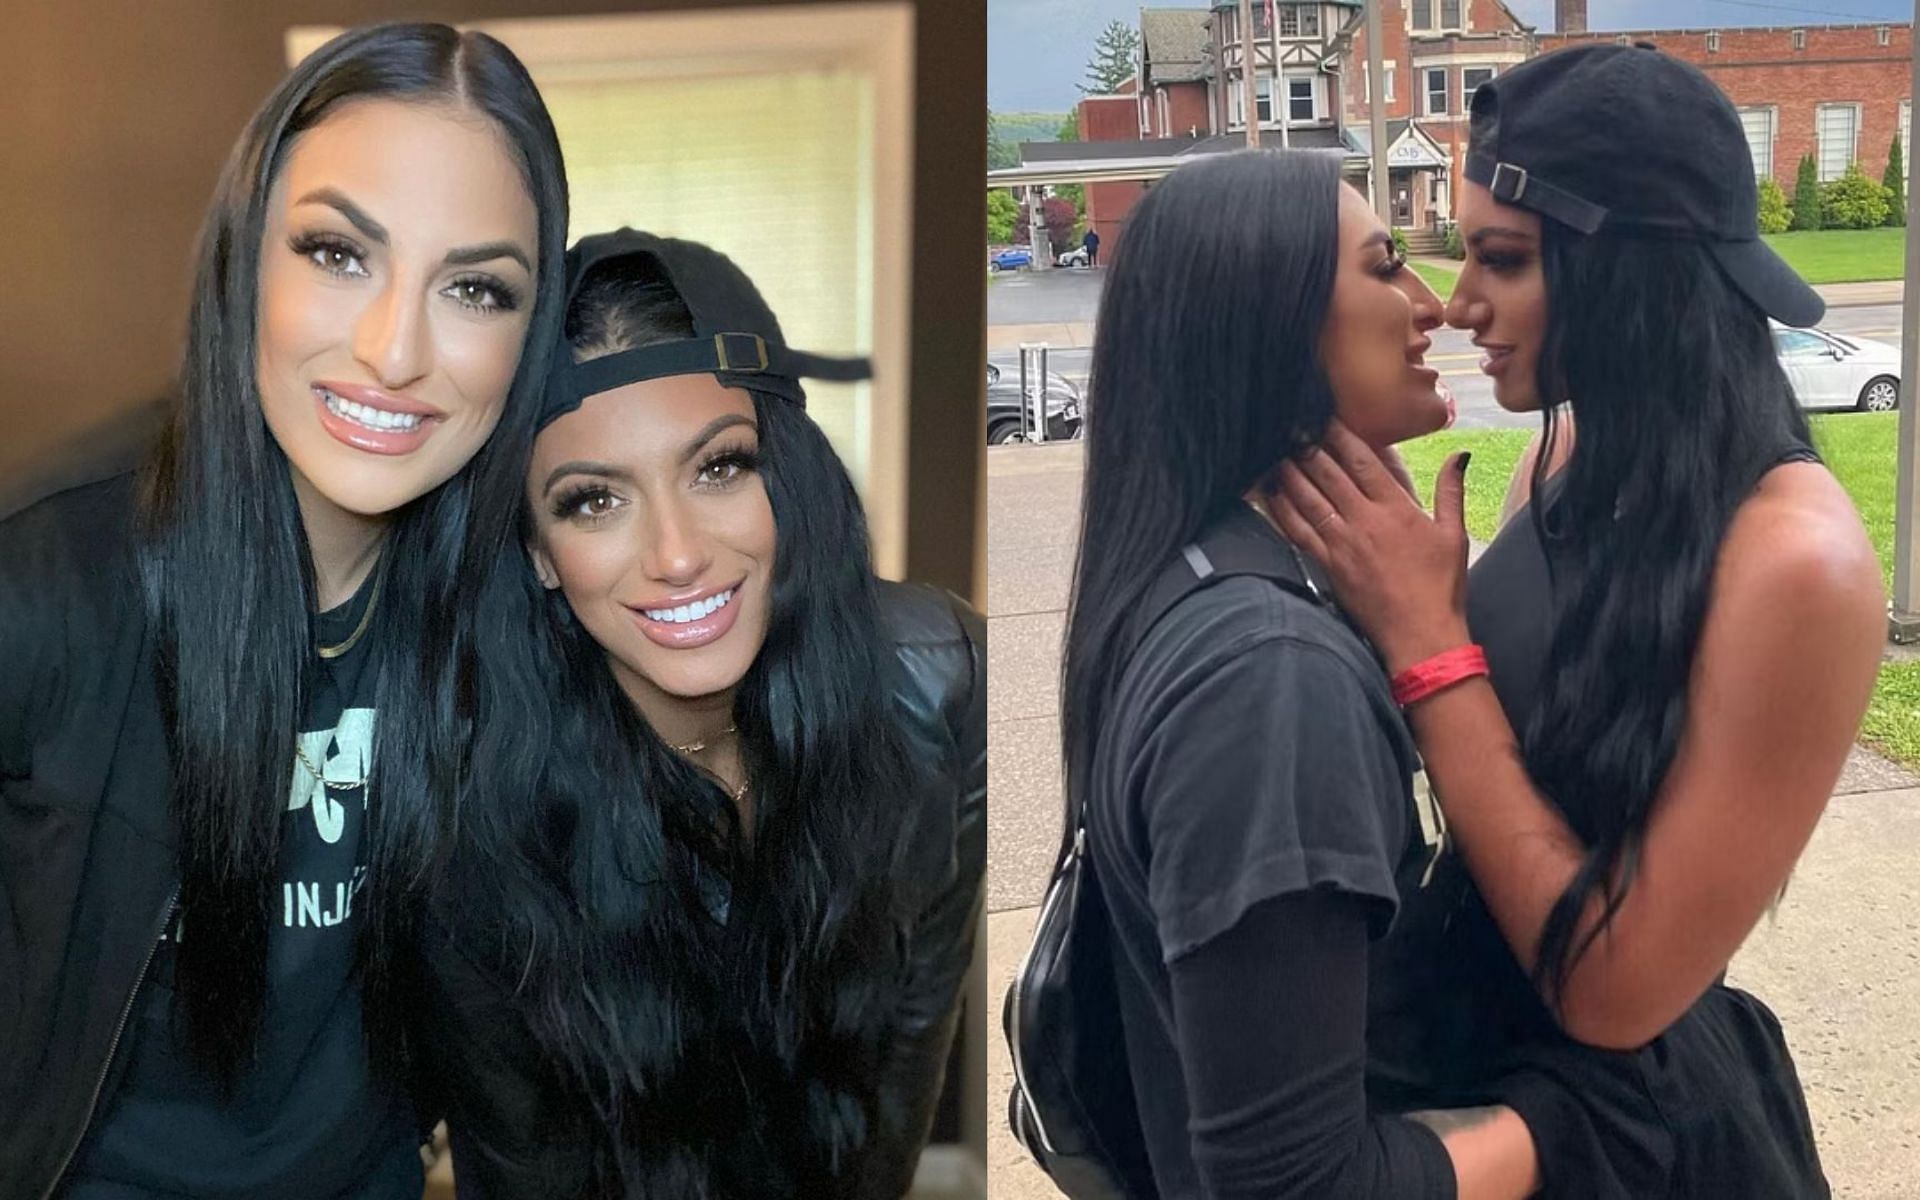 Sonya Deville has made her relationship quite public